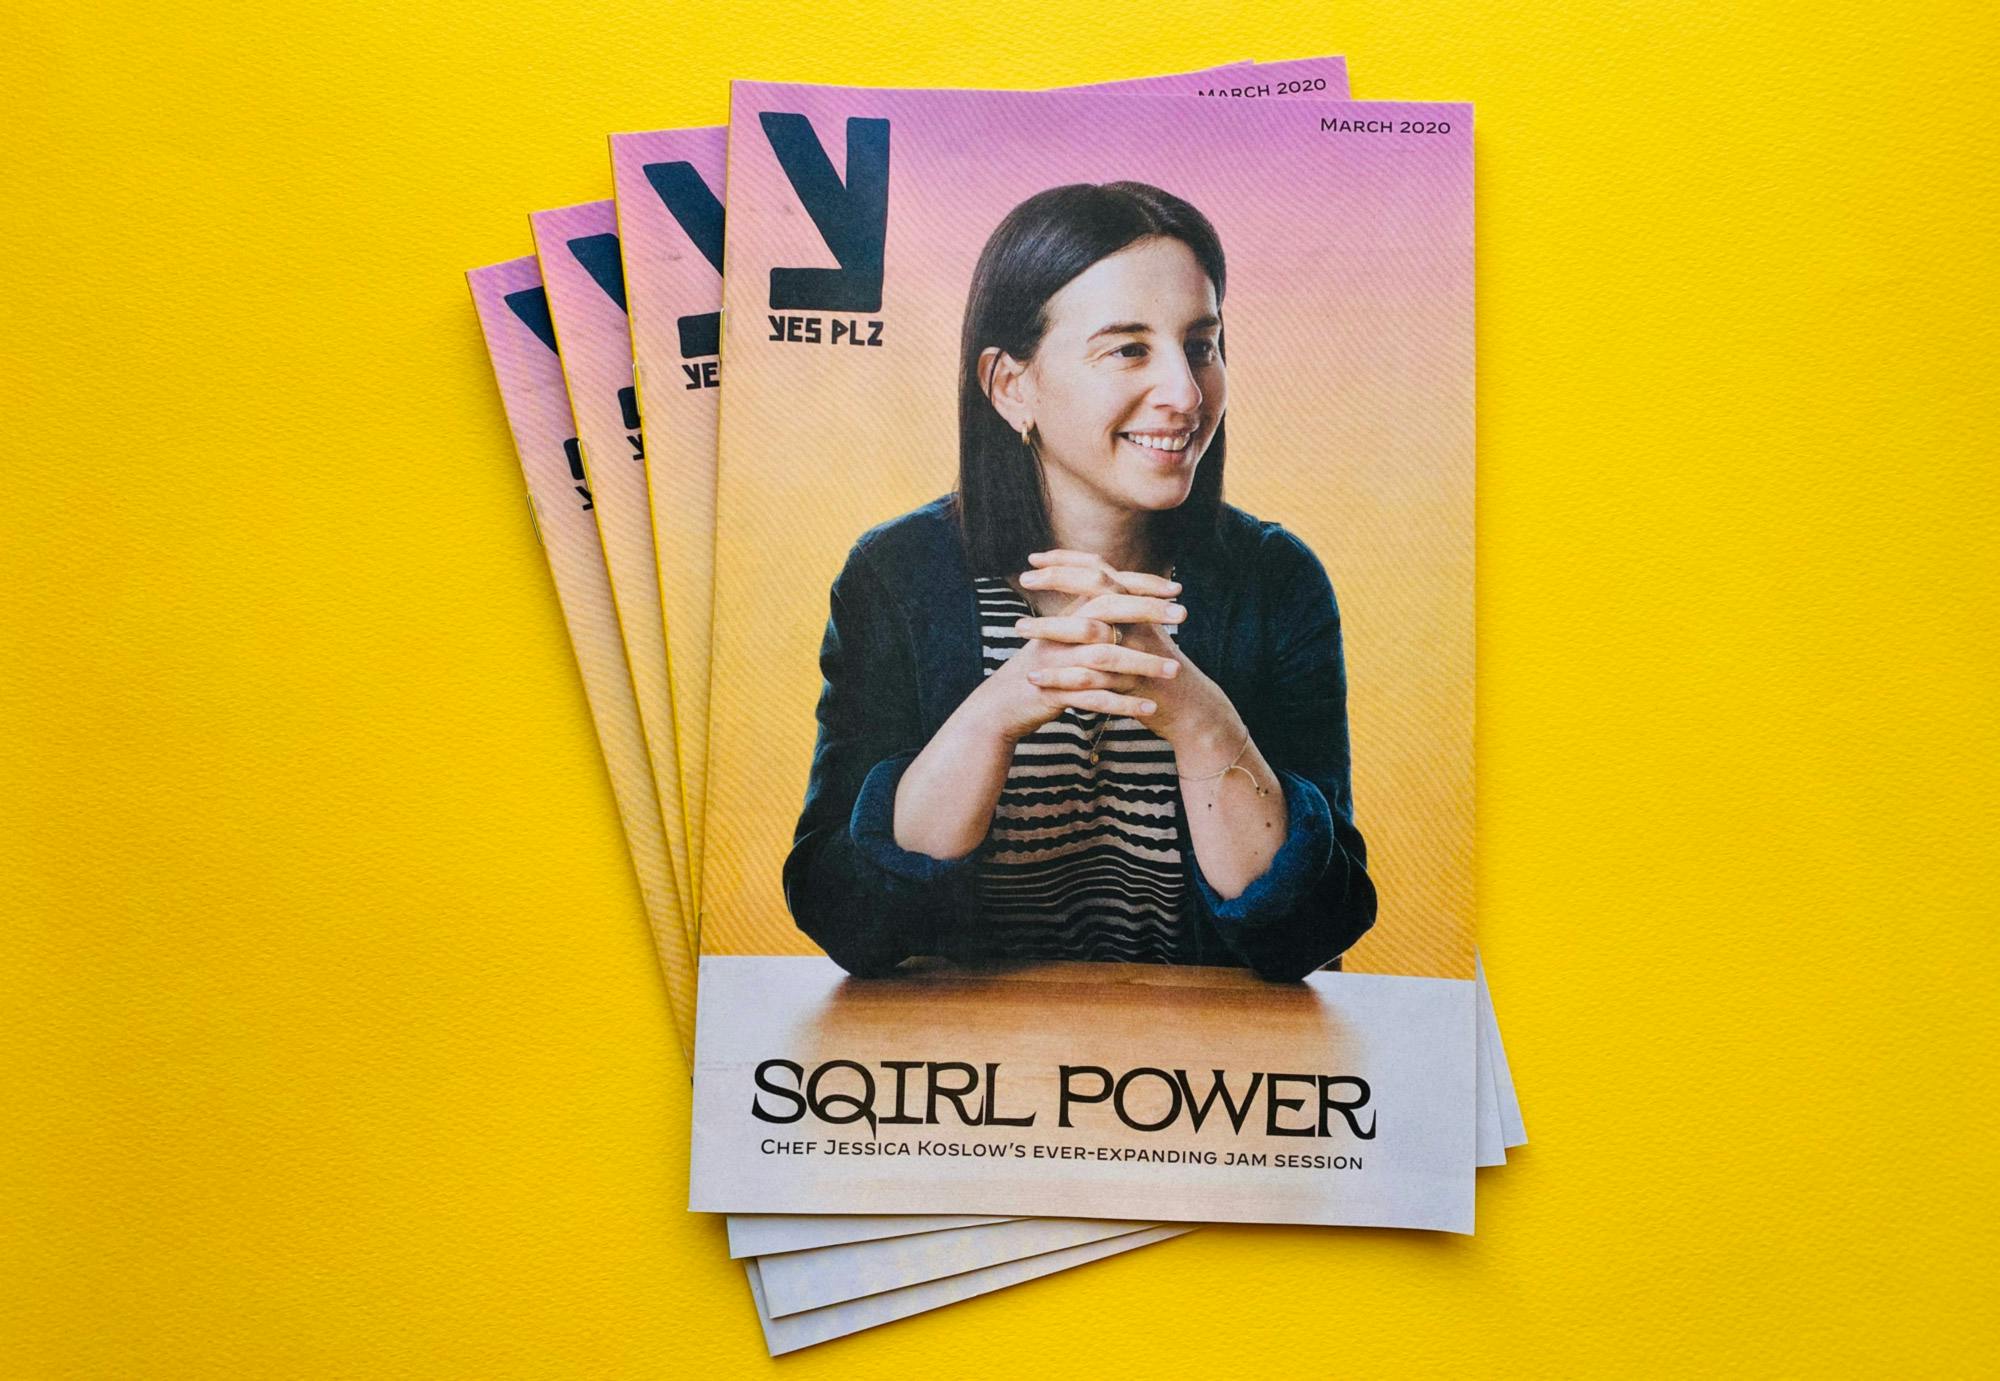 cover of the march issue of the YES PLZ zine featuring Jessica Koslow